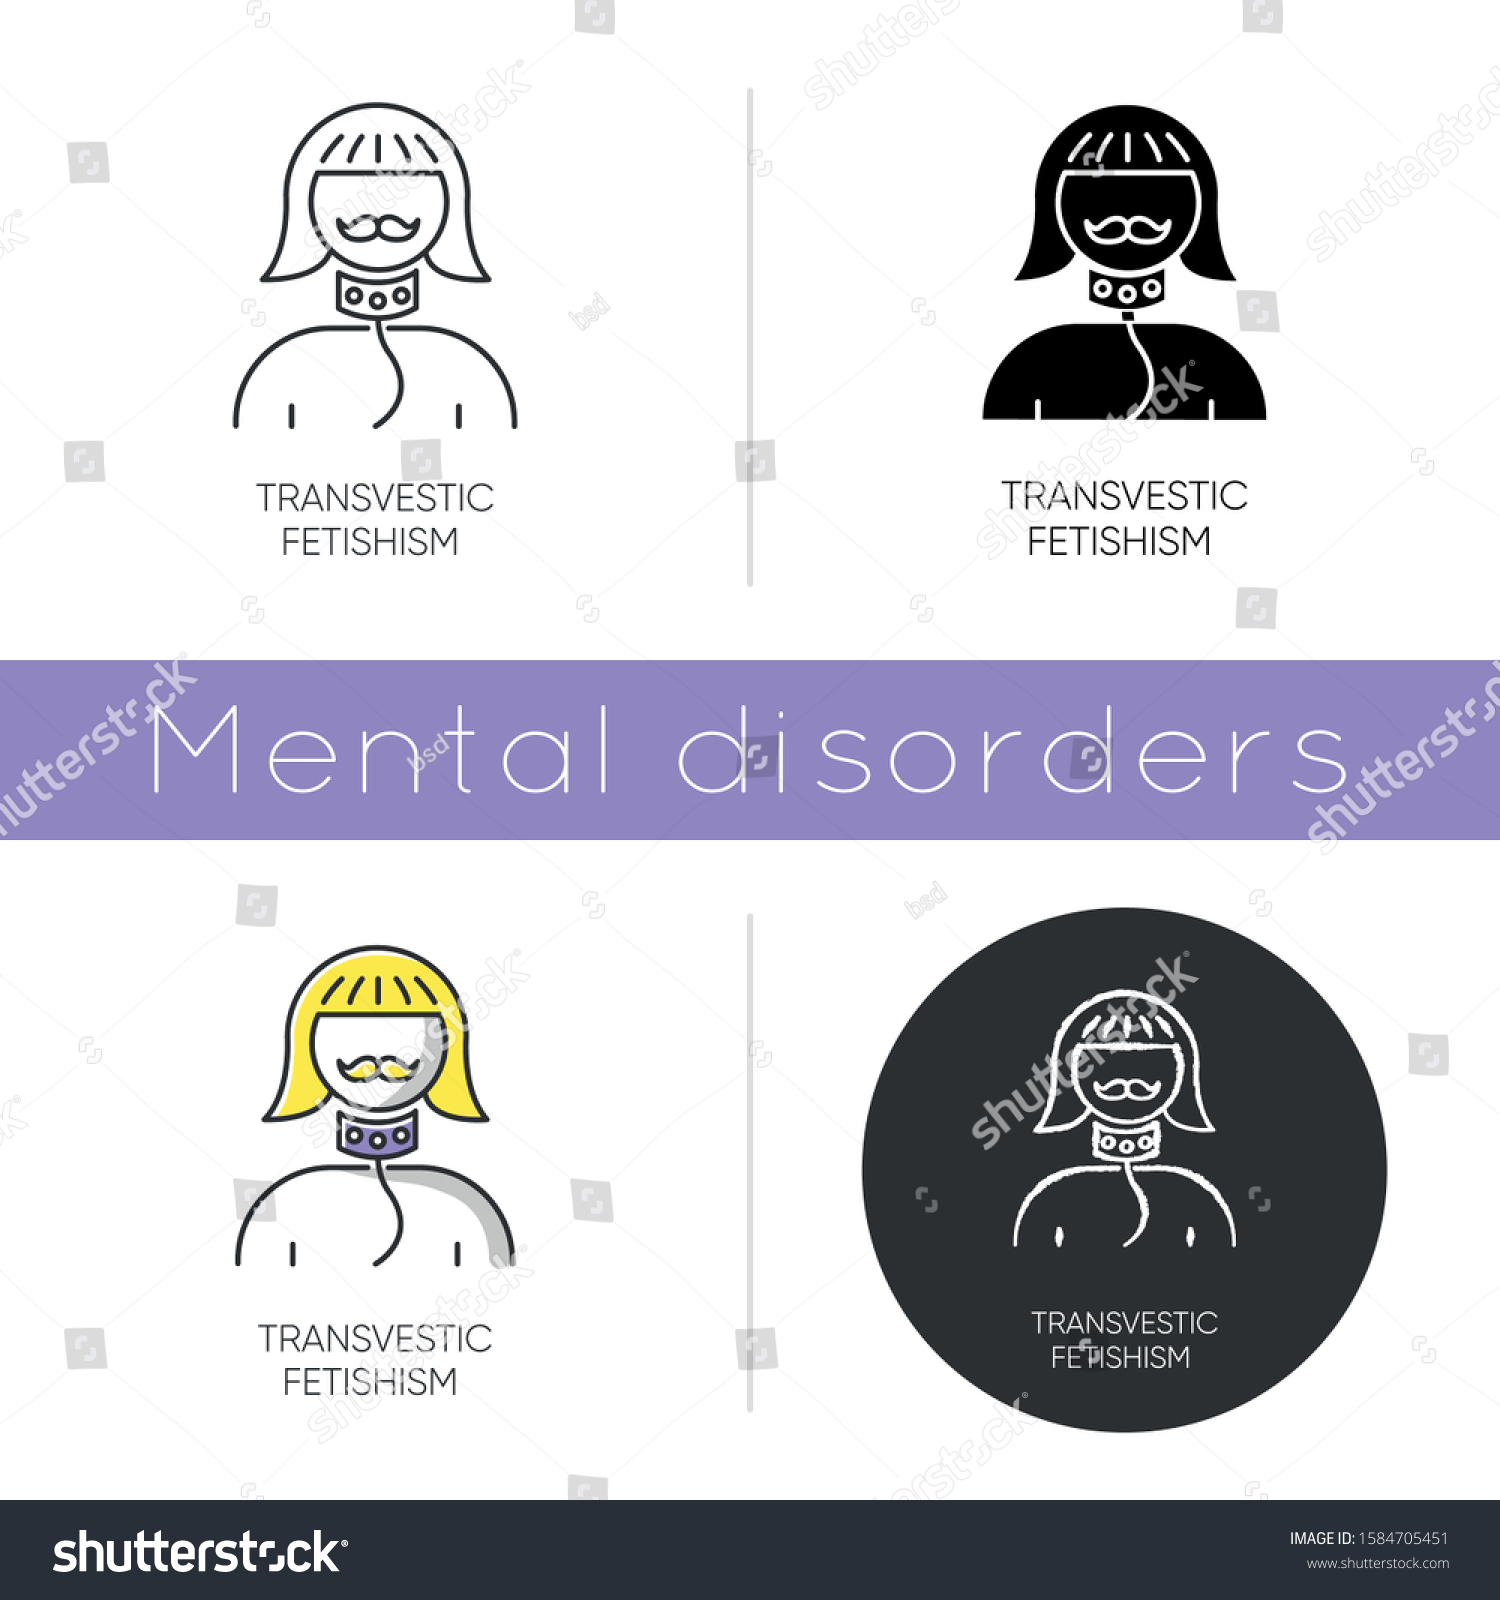 Transvestic Fetishism Icon Queer Person Androgynous Stock Vector Royalty Free 1584705451 8632